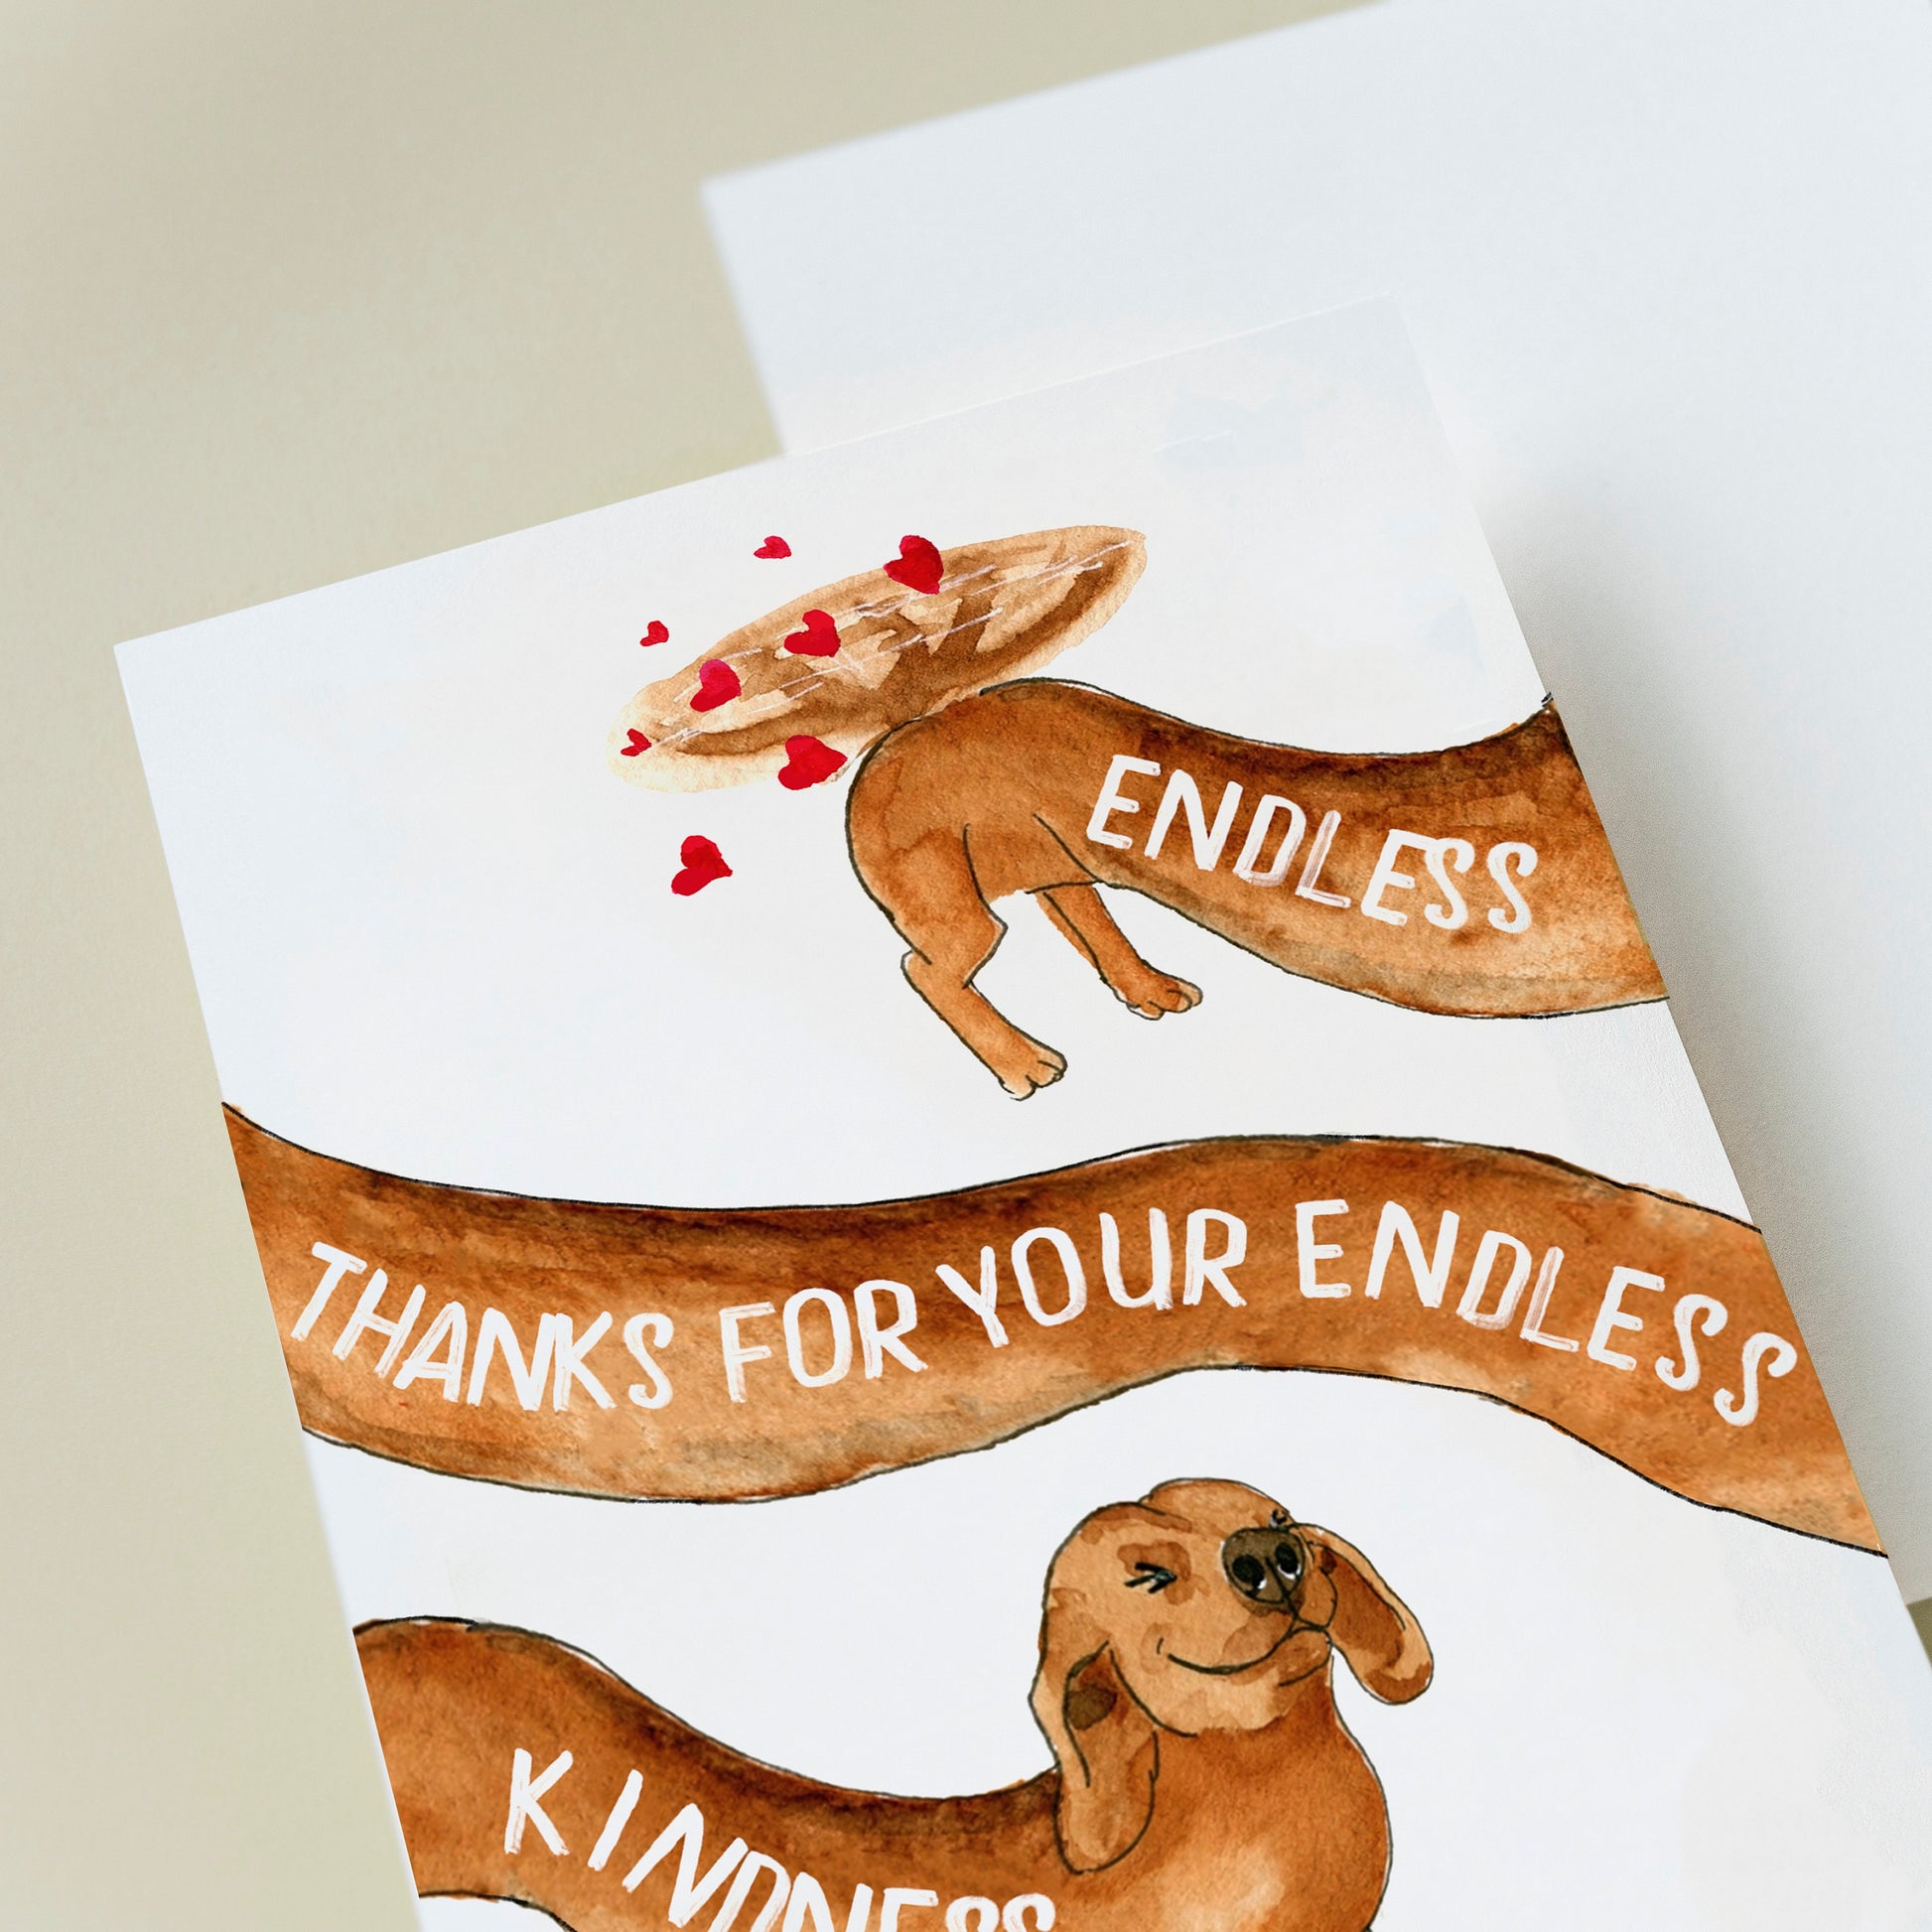 Wiener Dog Funny Thank You Cards Pack - Endless Thanks For Kindness Gift